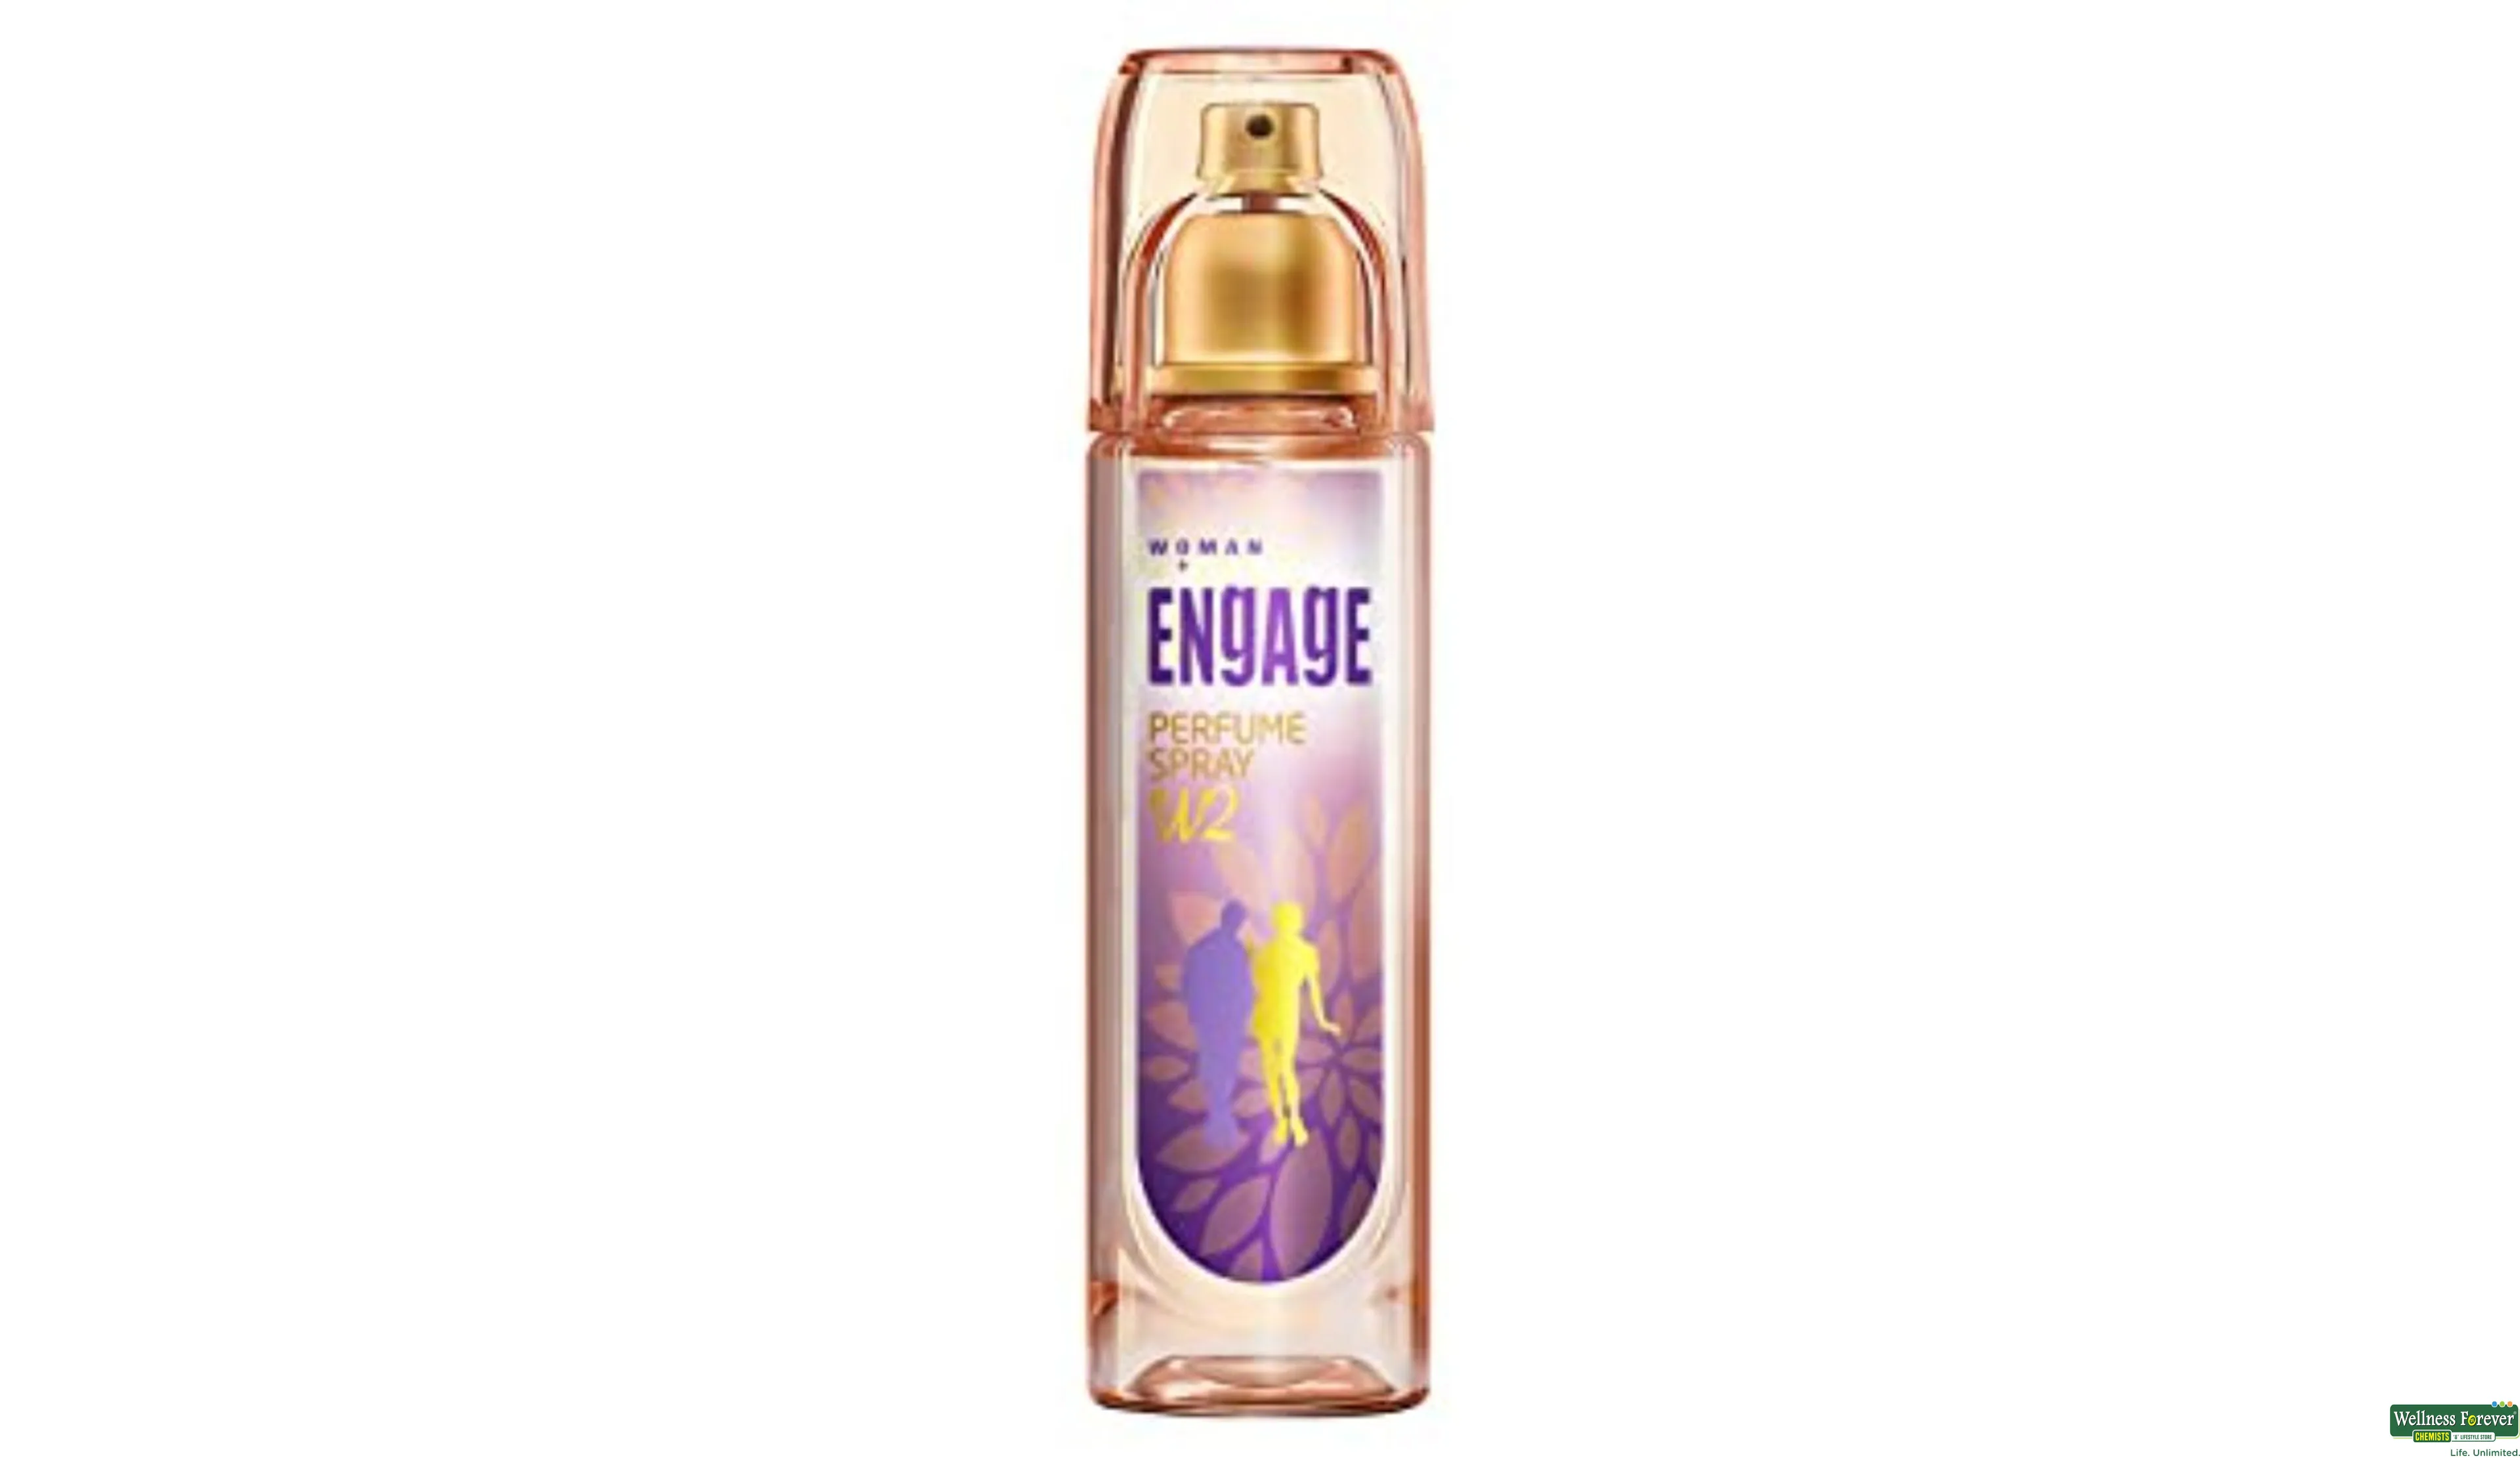 Deos & Perfumes: Buy Deos & Perfumes for Women & Men online at